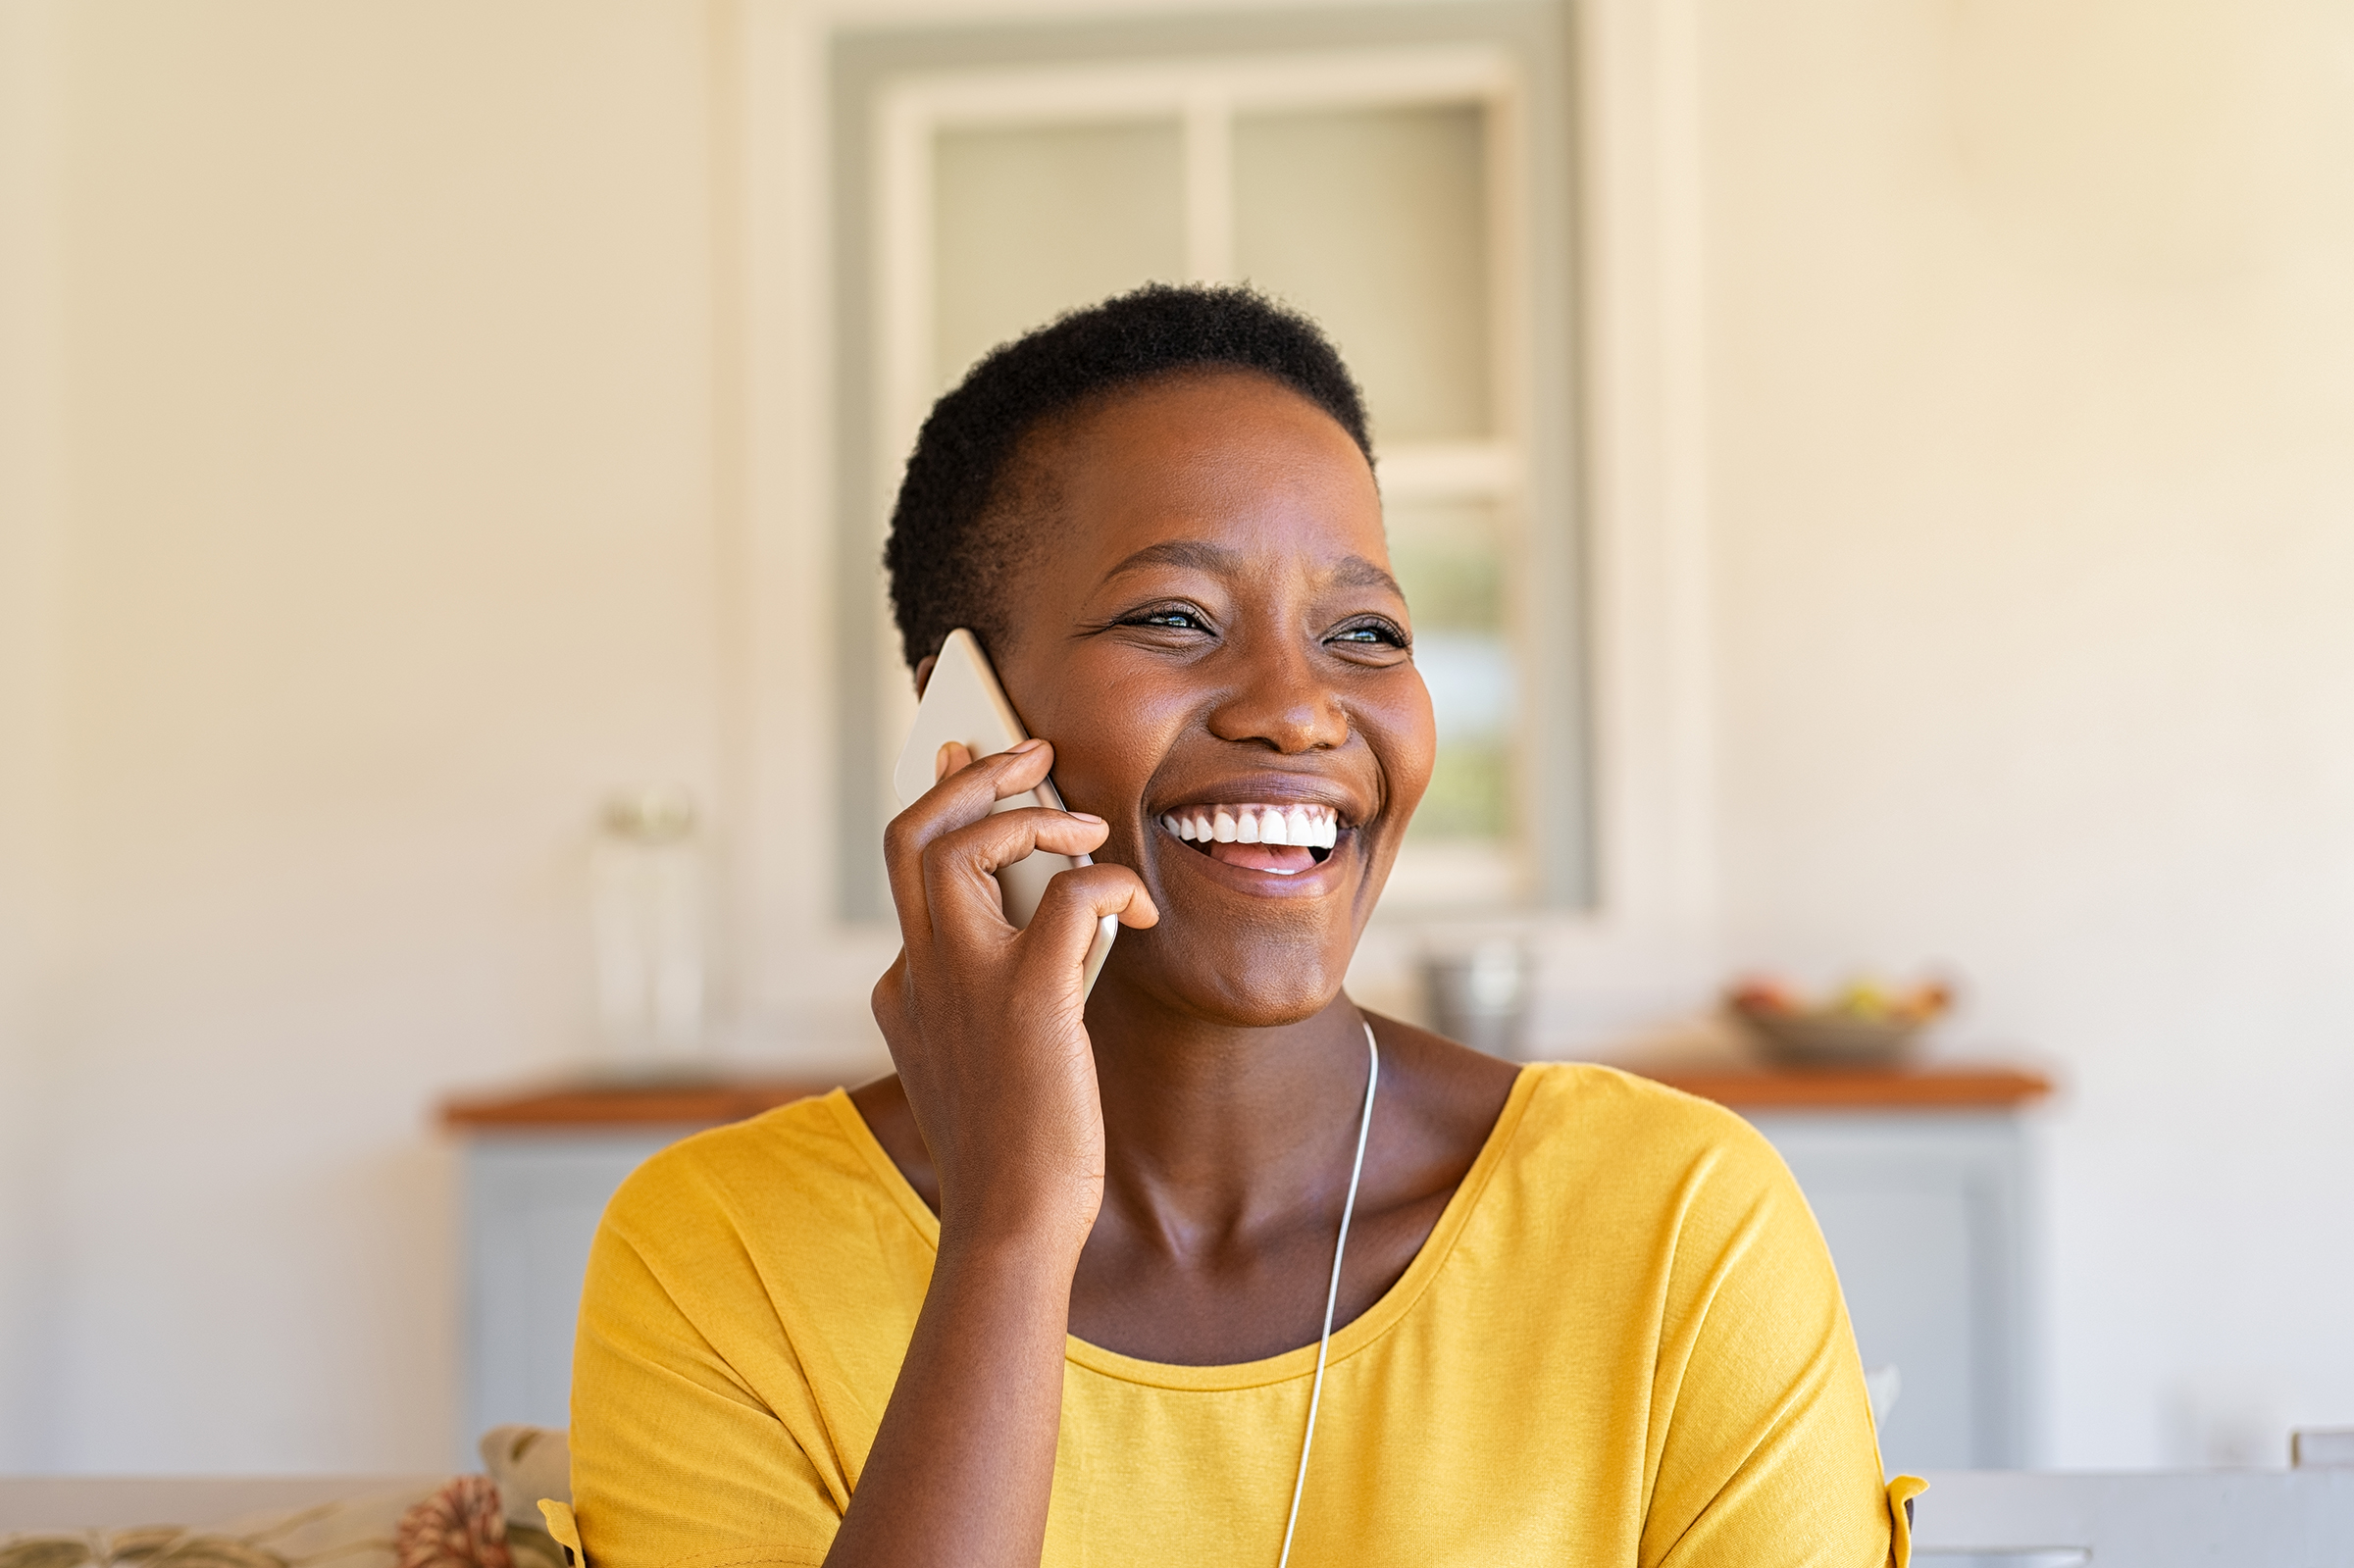 Woman with a mobile phone held to ear and smiling.